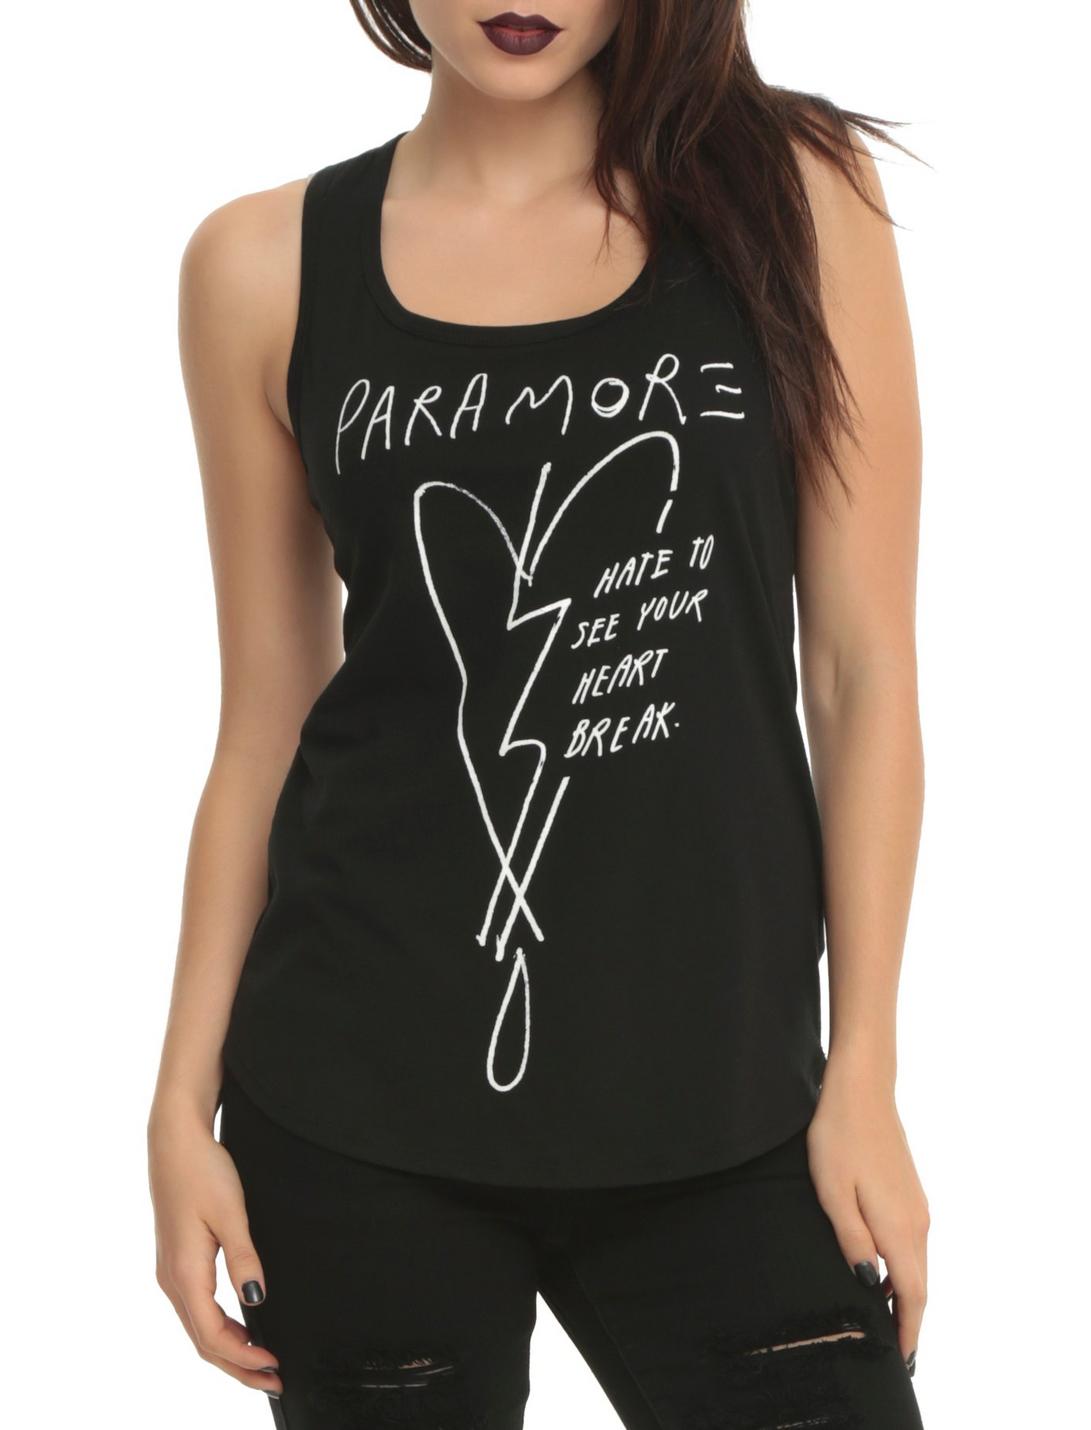 Paramore Hate To See Your Heart Break Girls Tank Top, BLACK, hi-res